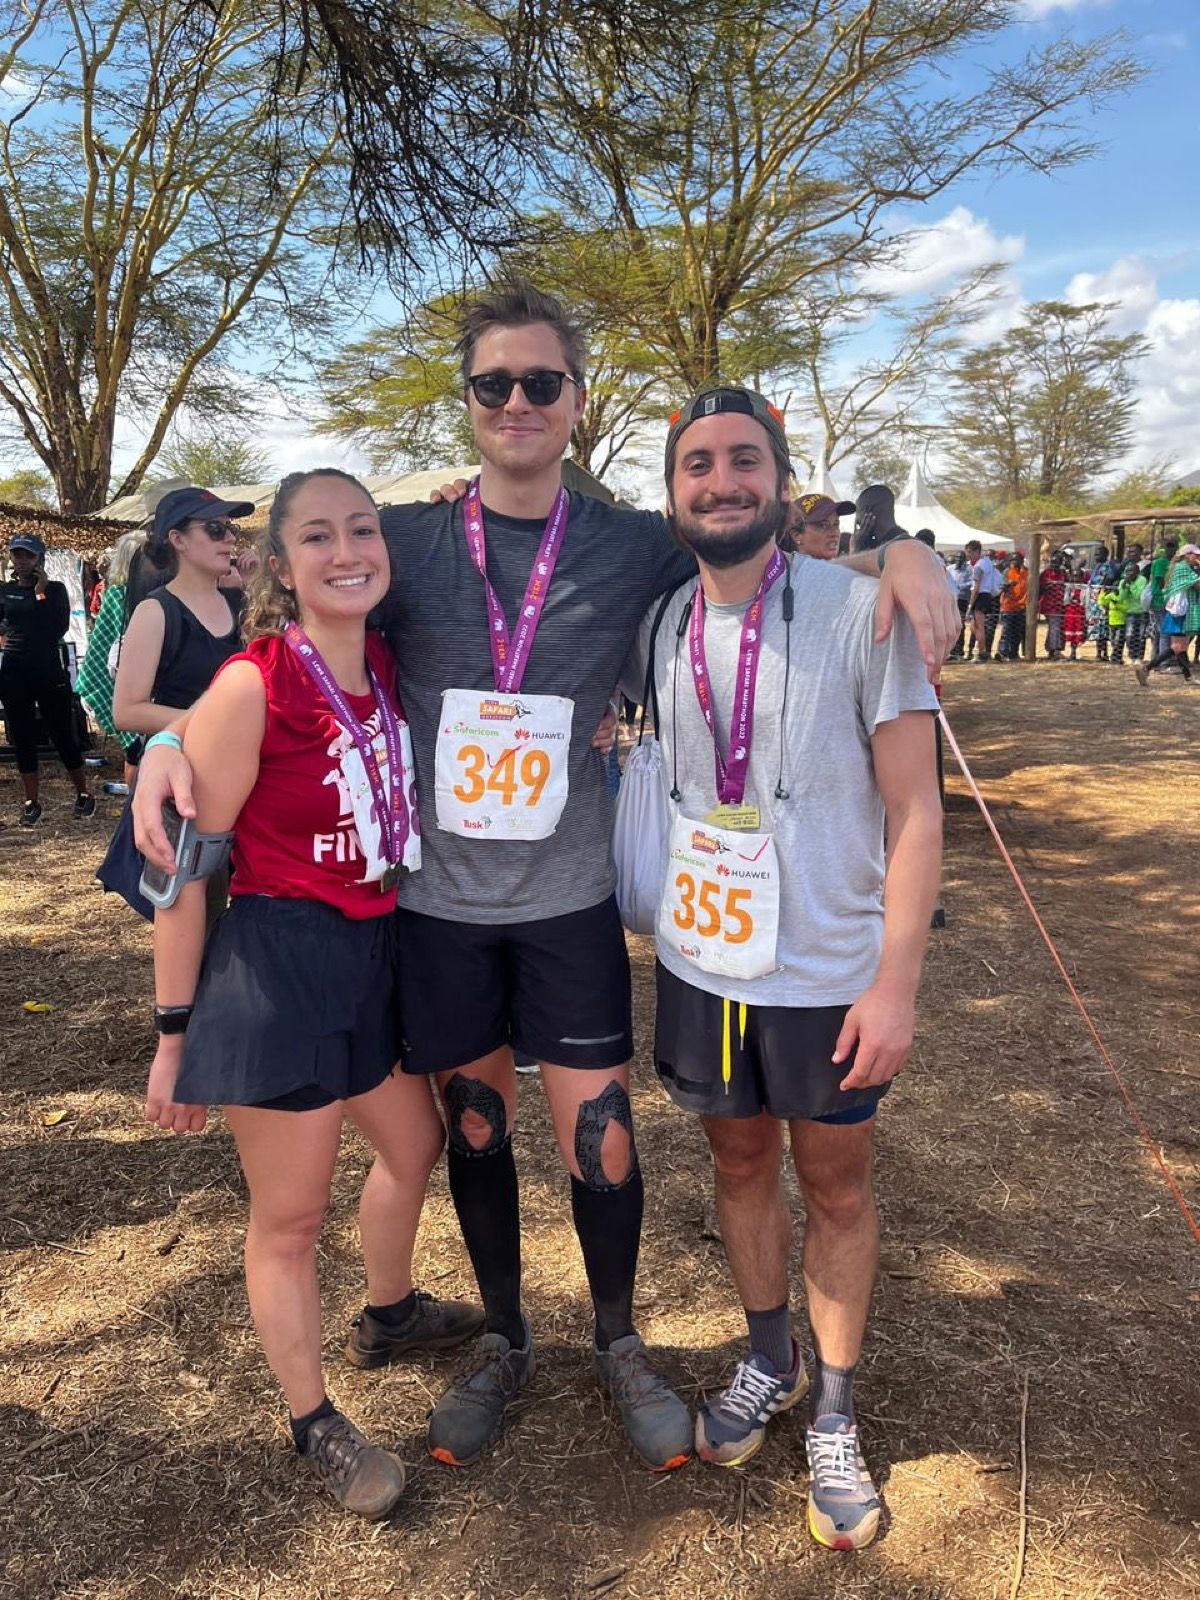 Borchert miraculously completes the 2022 Lewa half marathon a month after contracting COVID-19